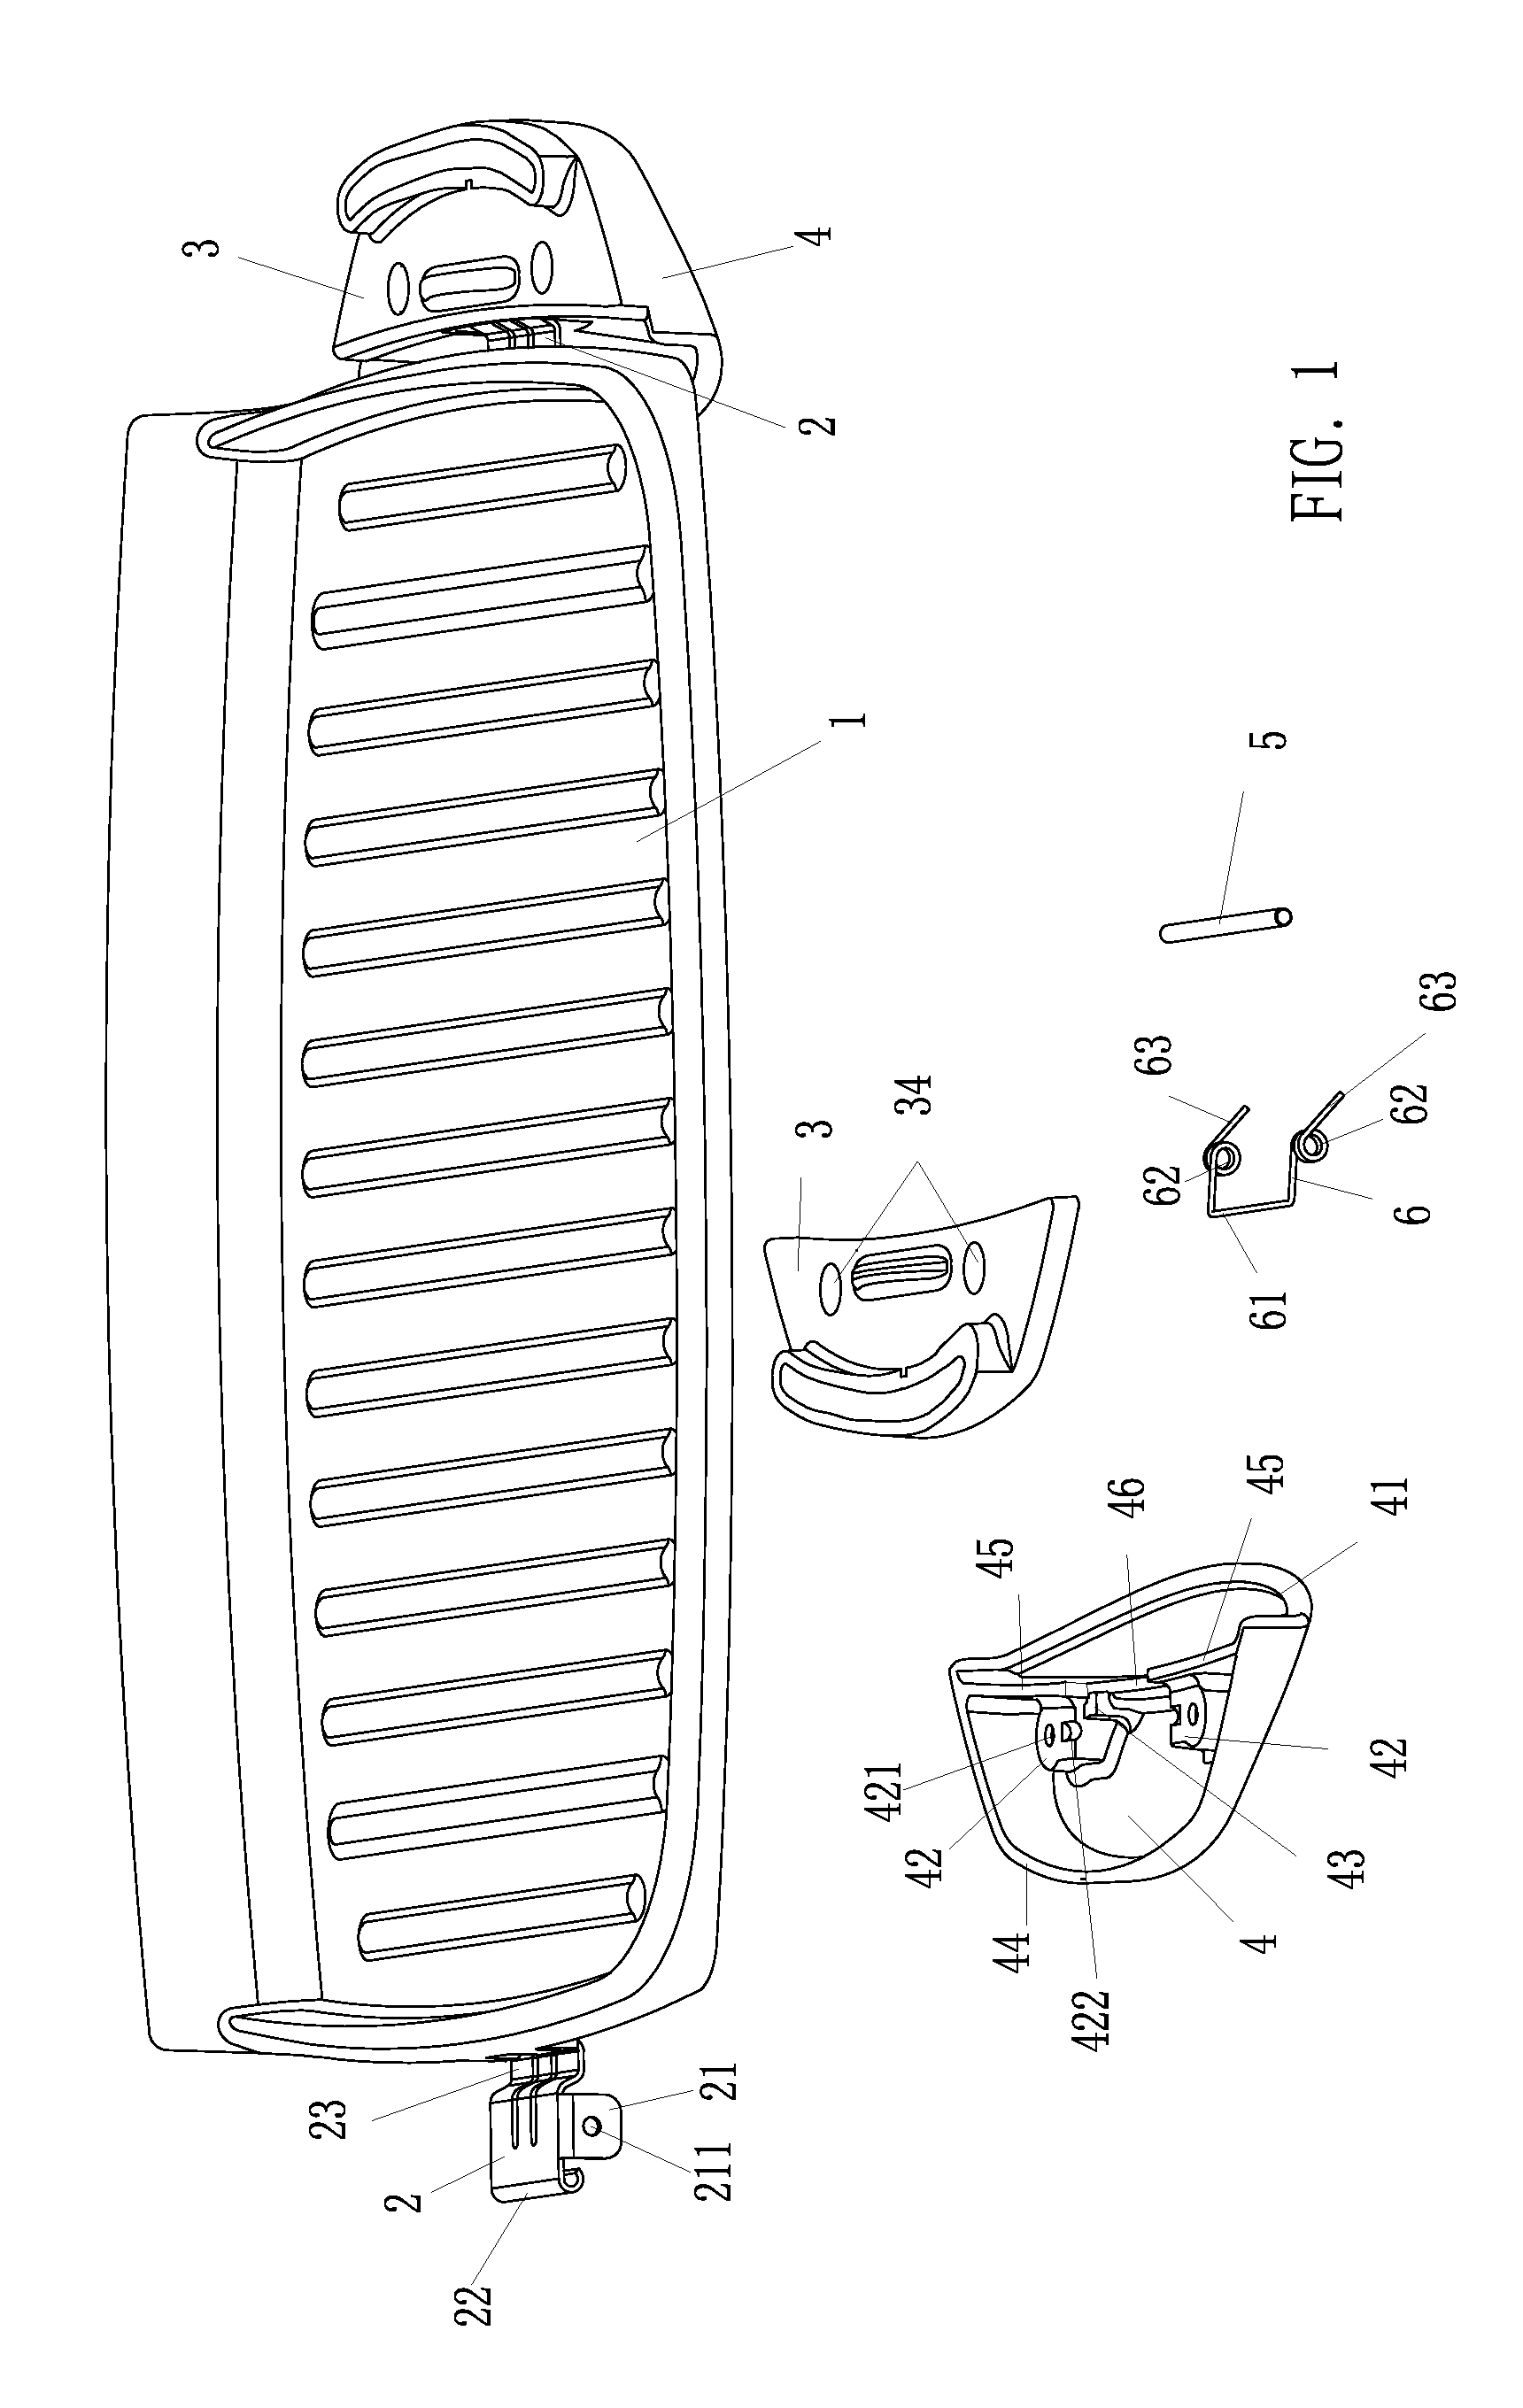 Handle for Baking Device